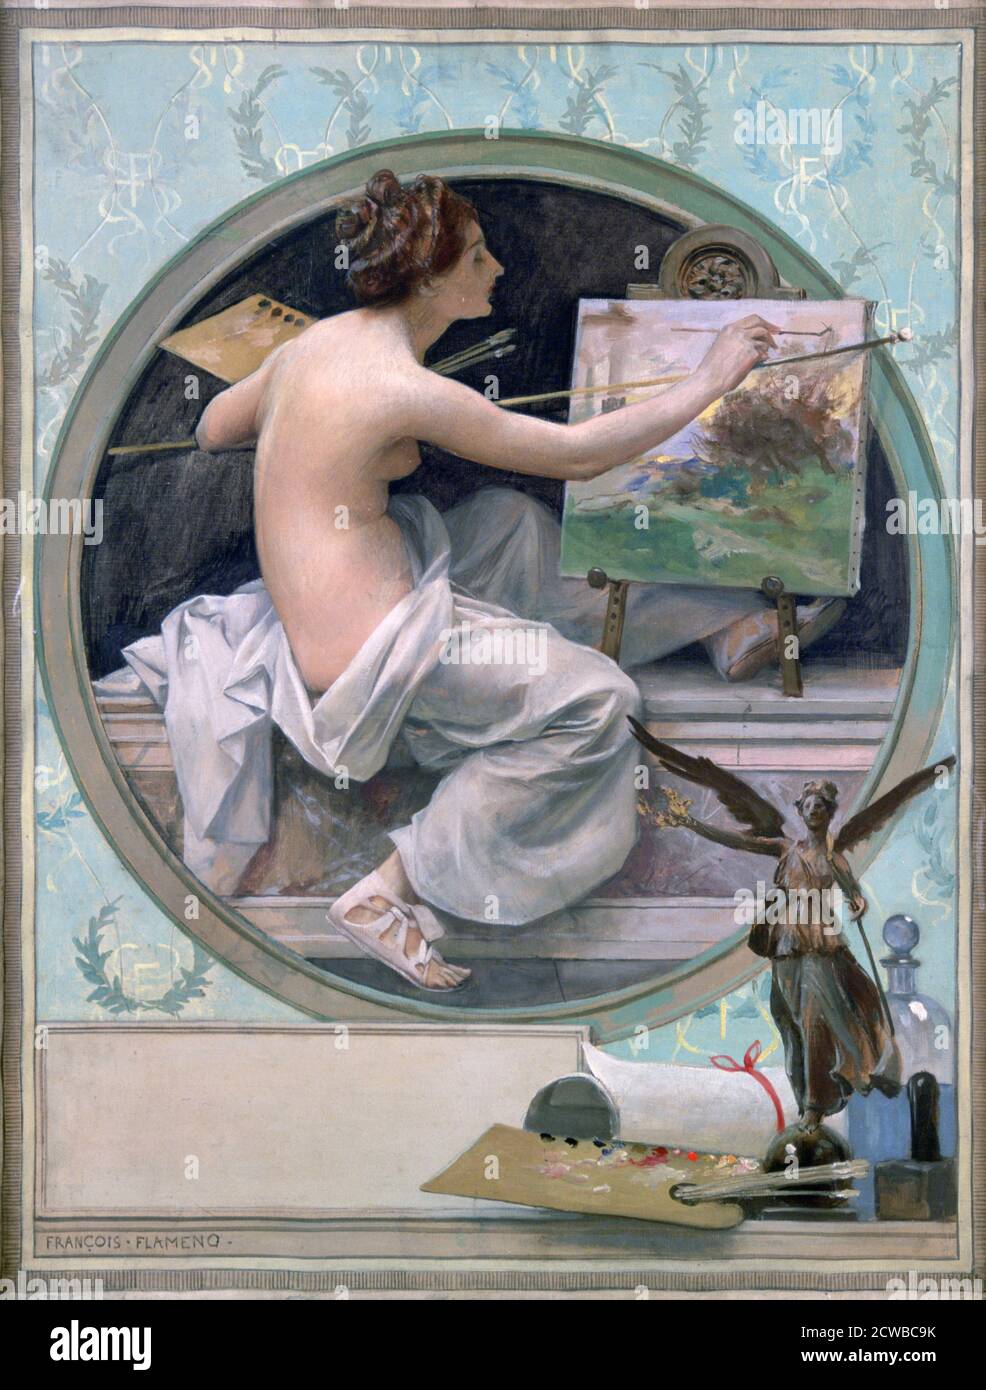 A painting by French artist Francois Flameng titled 'Allegory', 1856-1923. Stock Photo